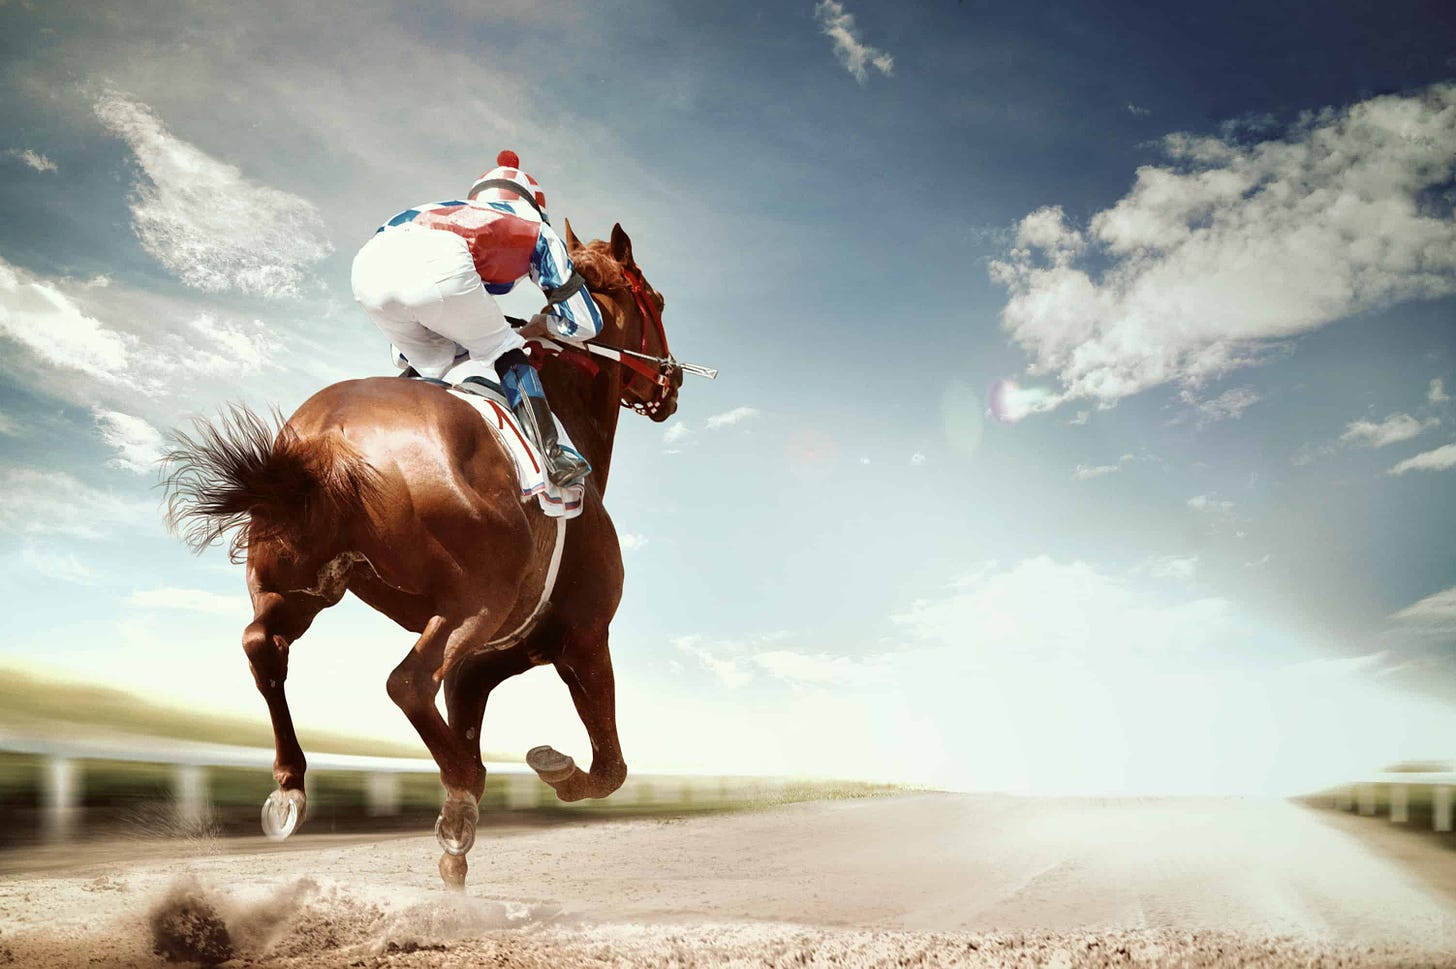 Choosing the best horse racing apps for beginners | Horse and Rider